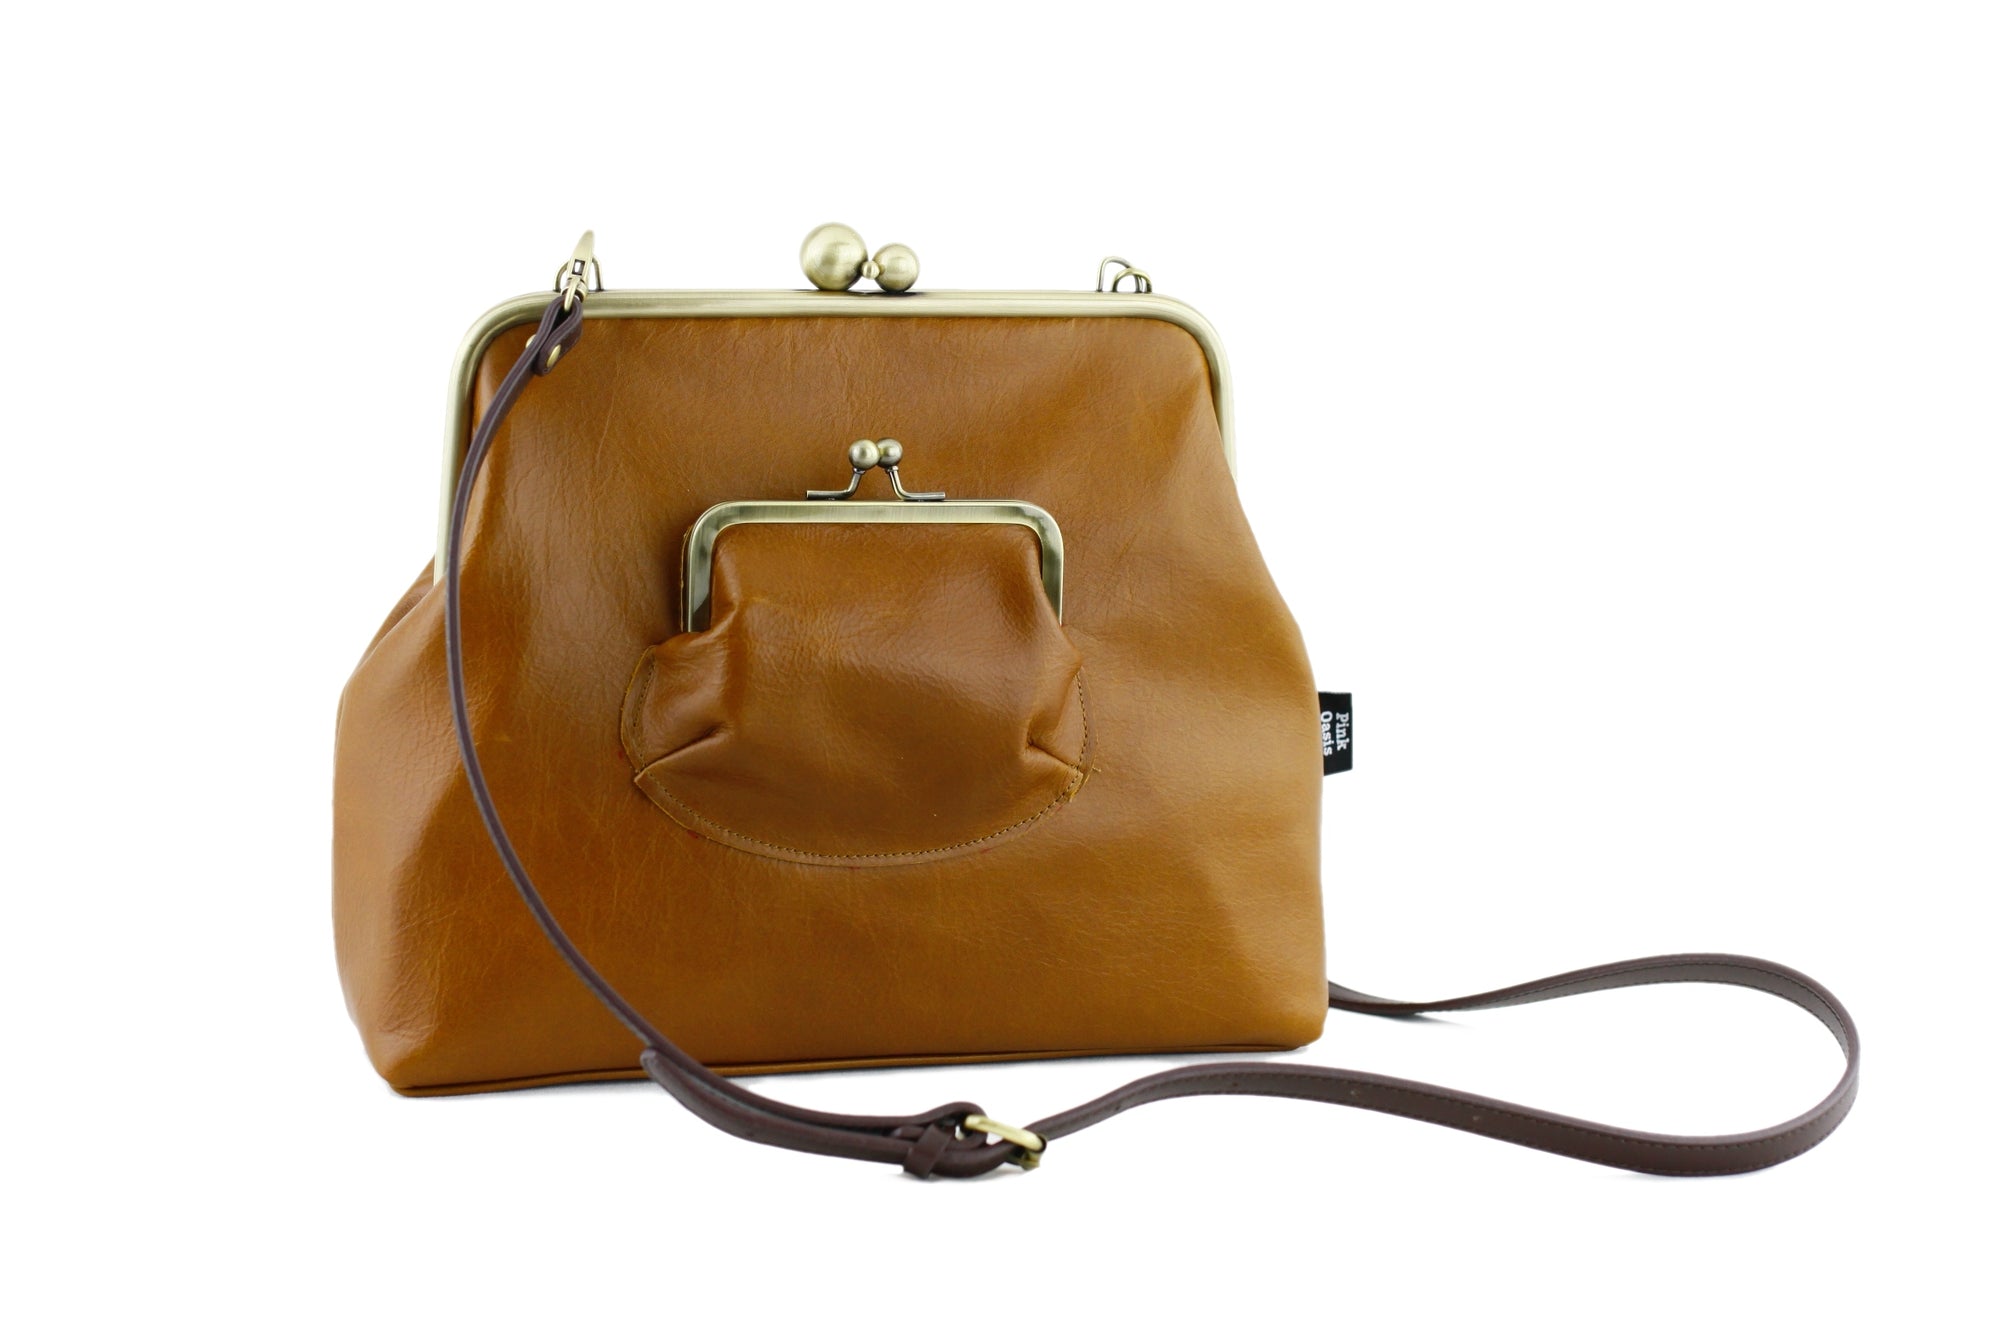 Distressed Tan Leather Crossbody Bag | PINK OASIS